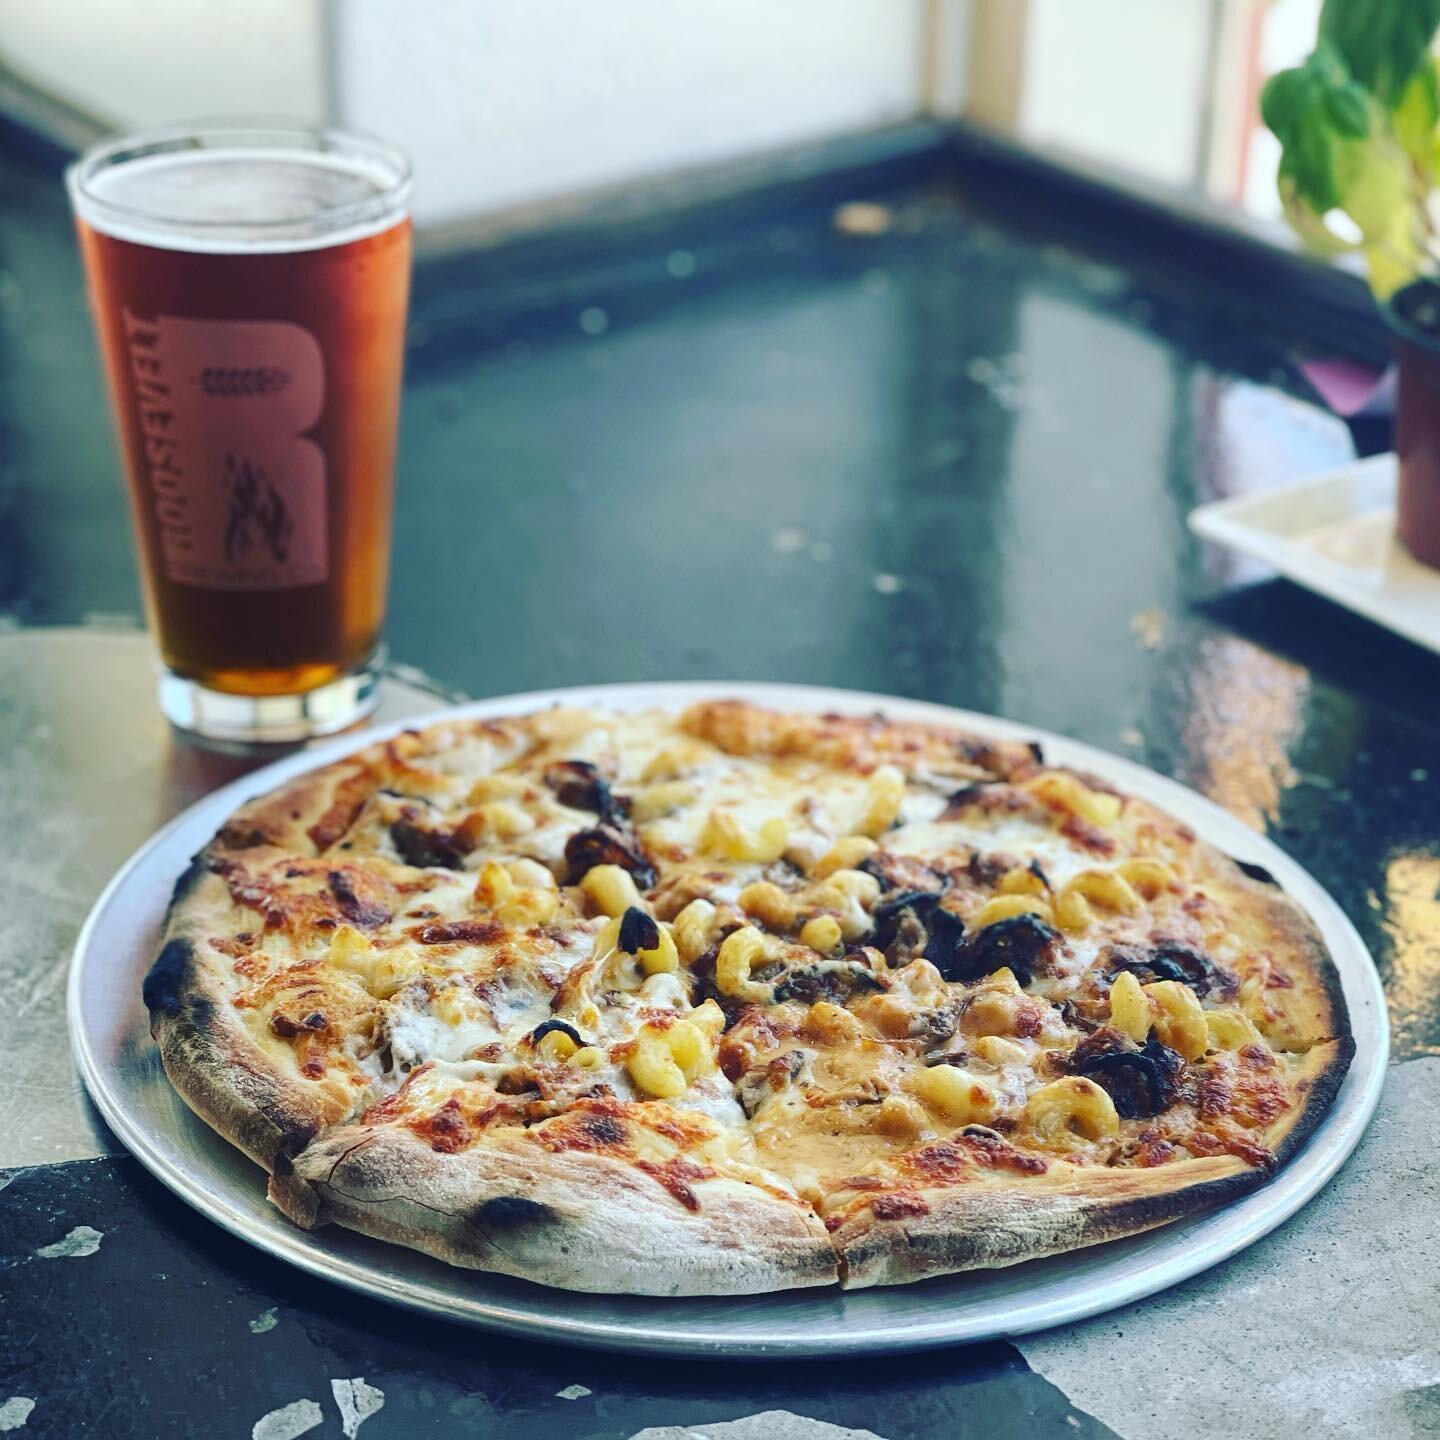 Our Foodie Friday feature this week is a bbq shredded rib and mac &amp; cheese pizza!  Check us out for something fun and new Fridays at both locations!  Cheers!